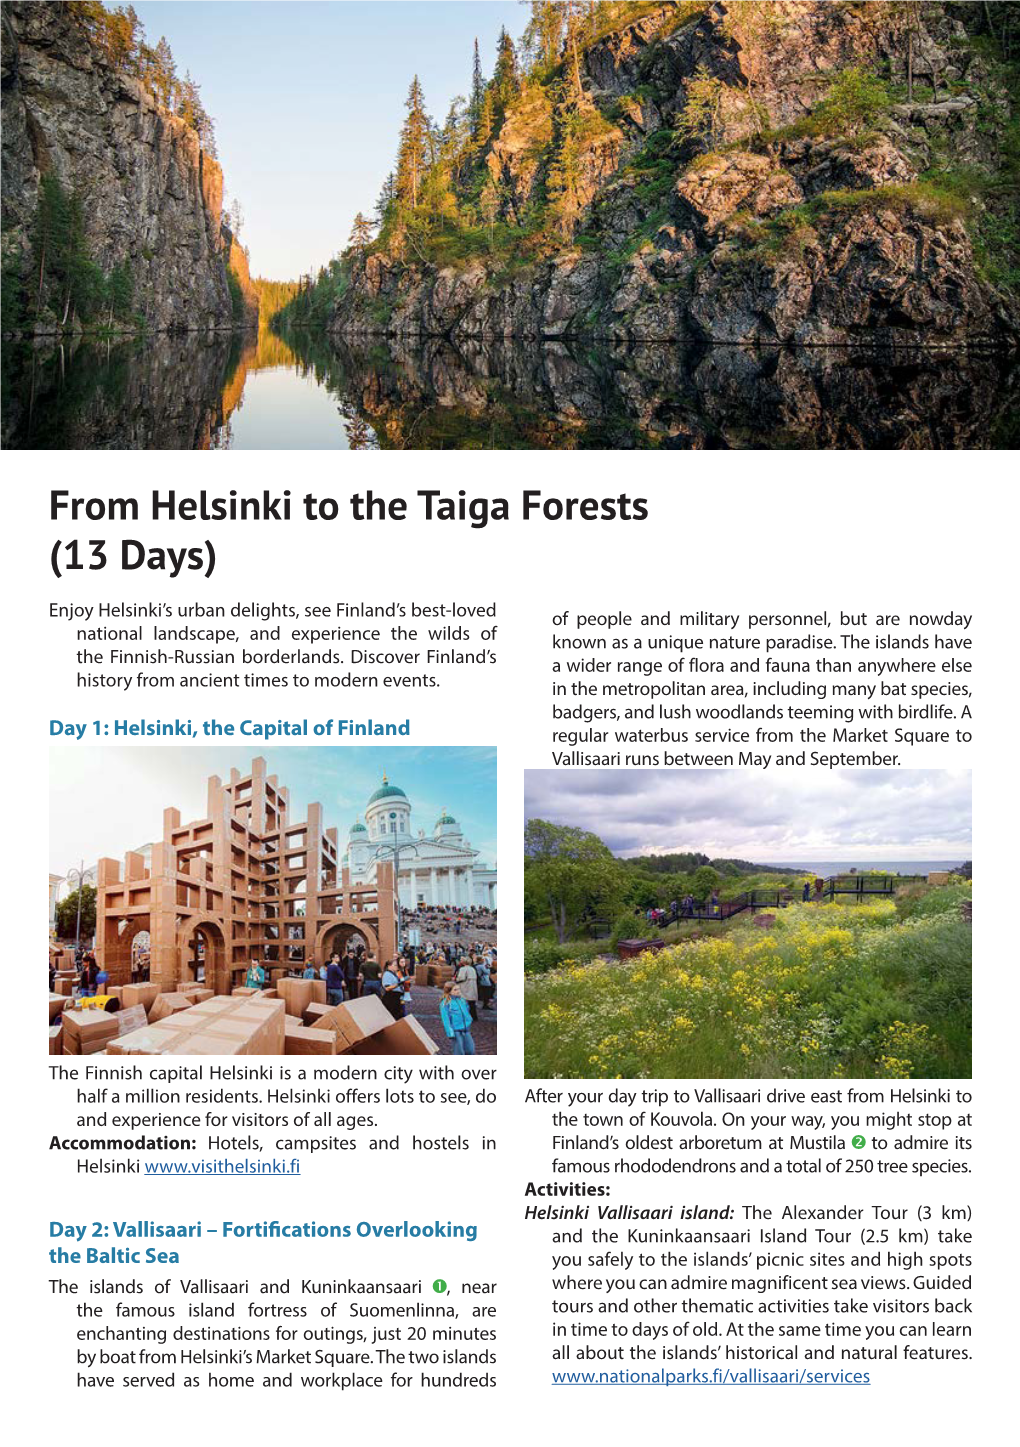 From Helsinki to the Taiga Forests (13 Days)